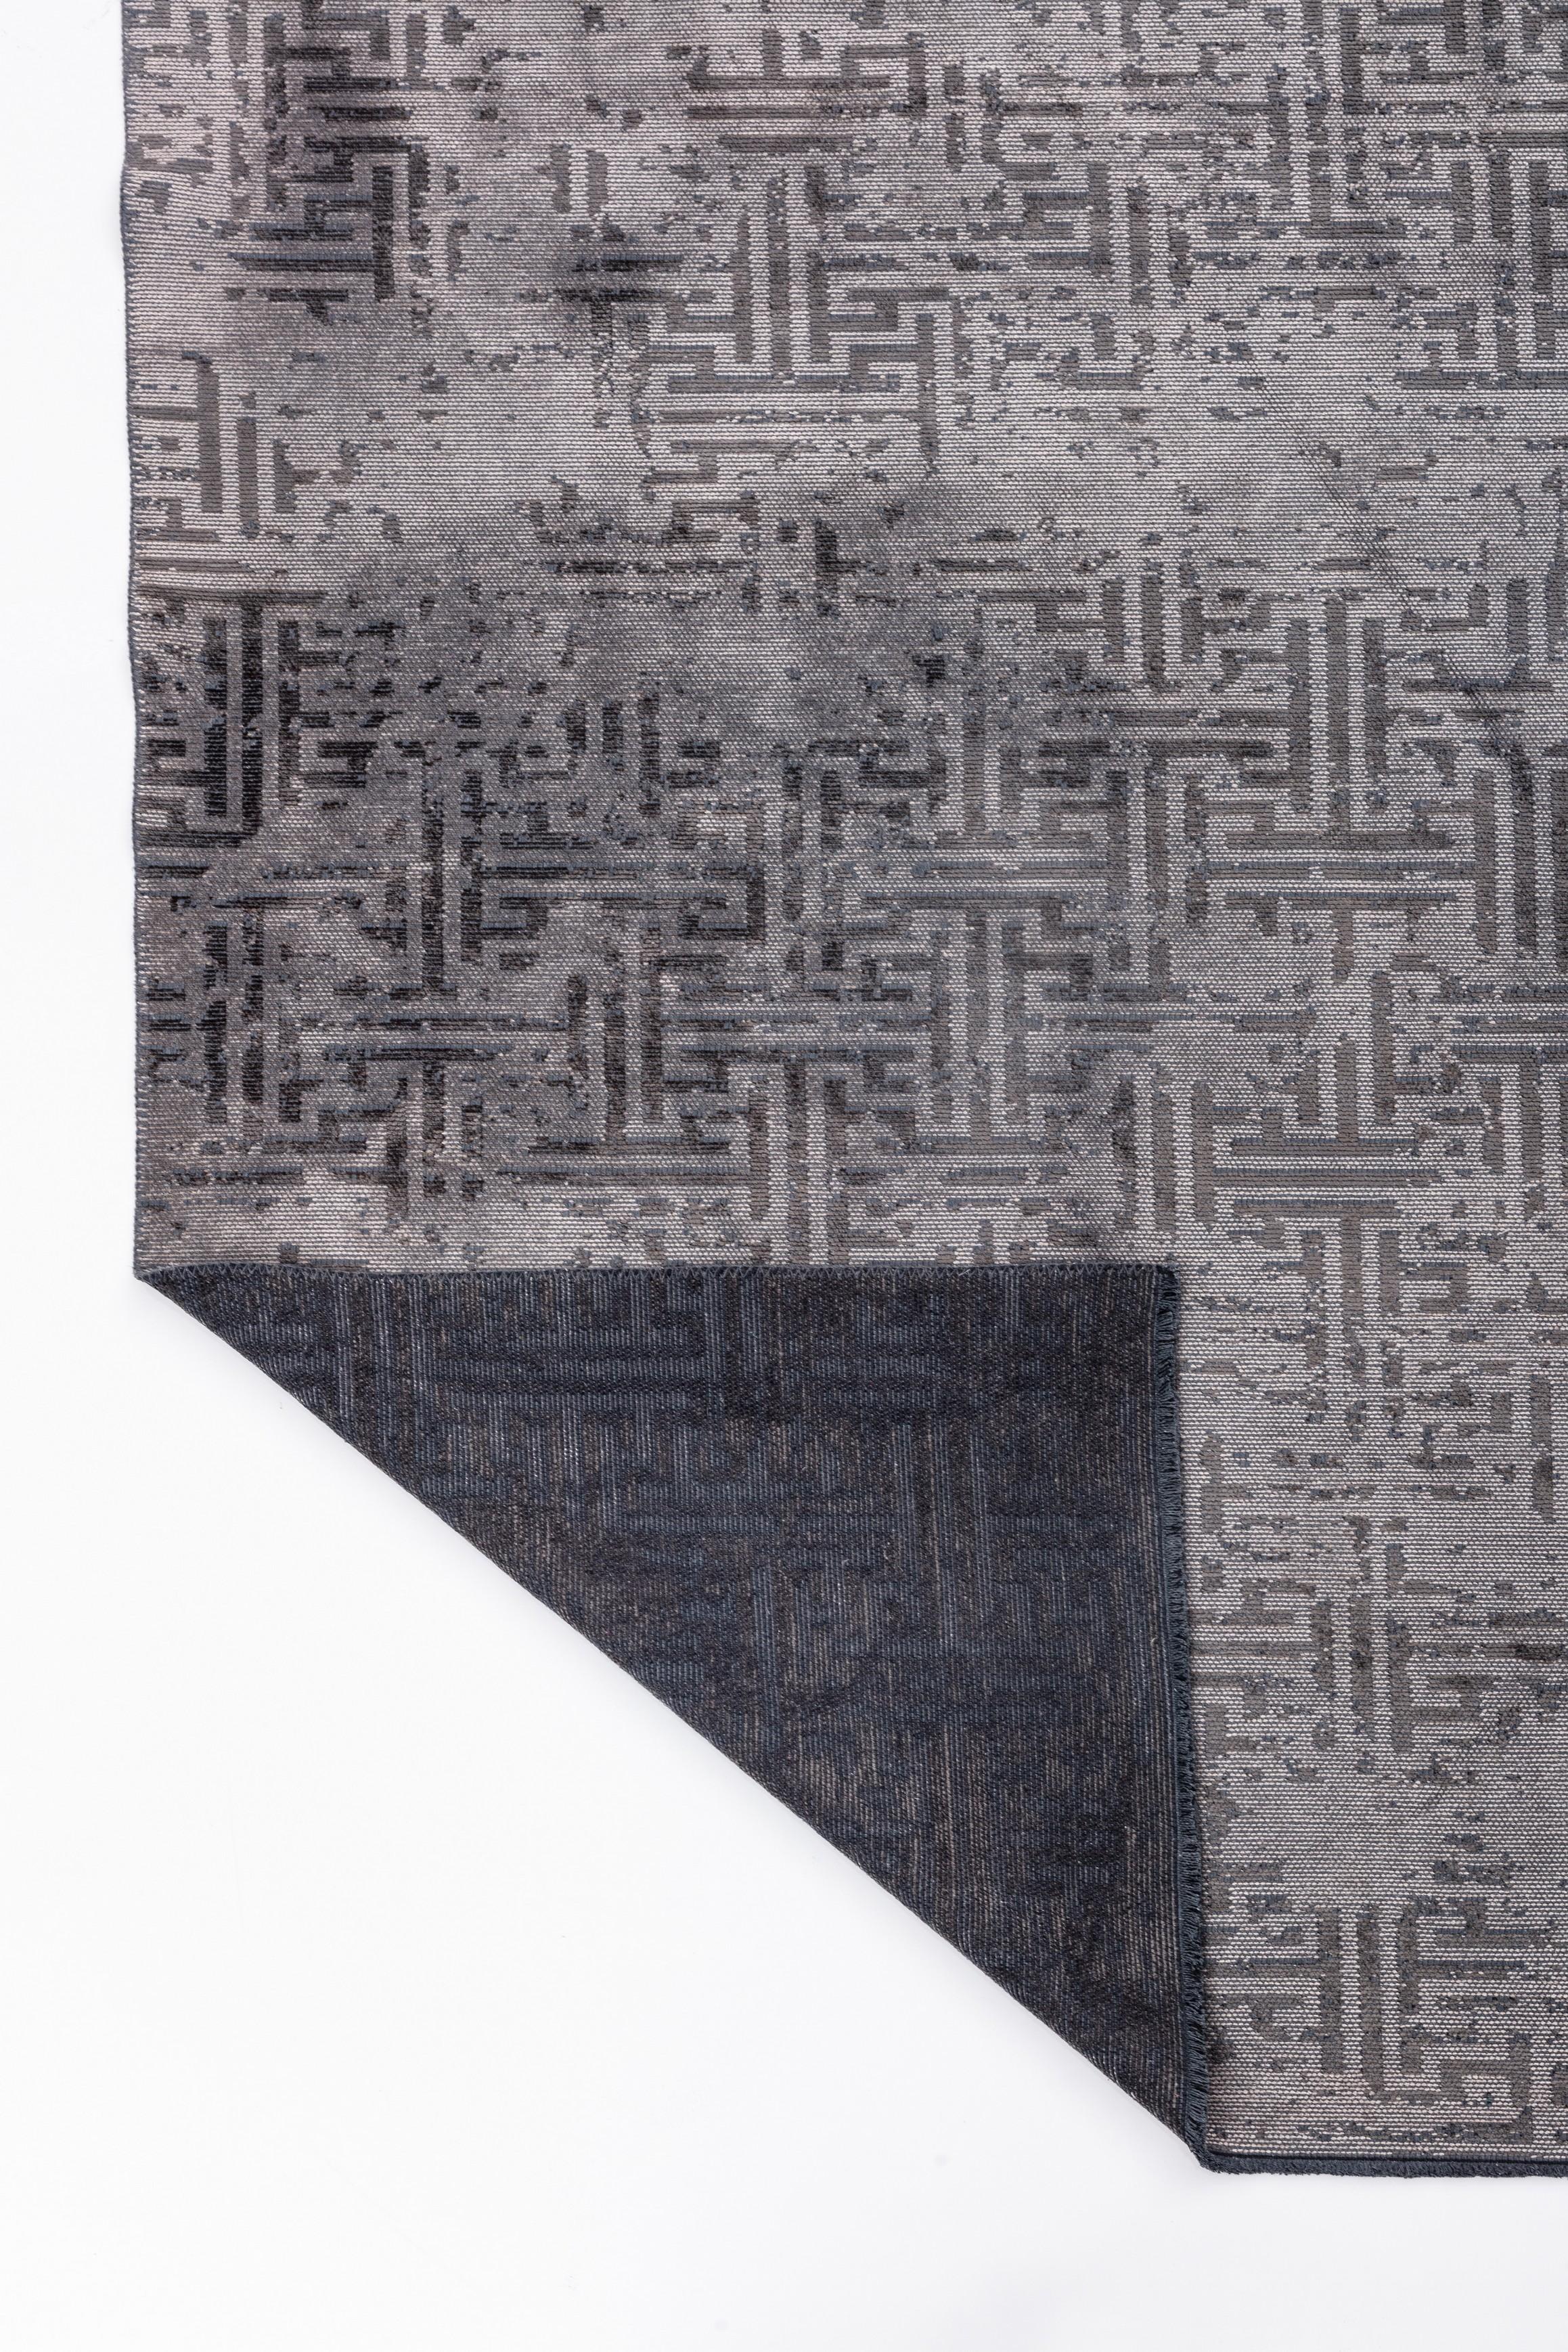 For Sale:  (Gray) Modern Camouflage Luxury Hand-Finished Area Rug 3